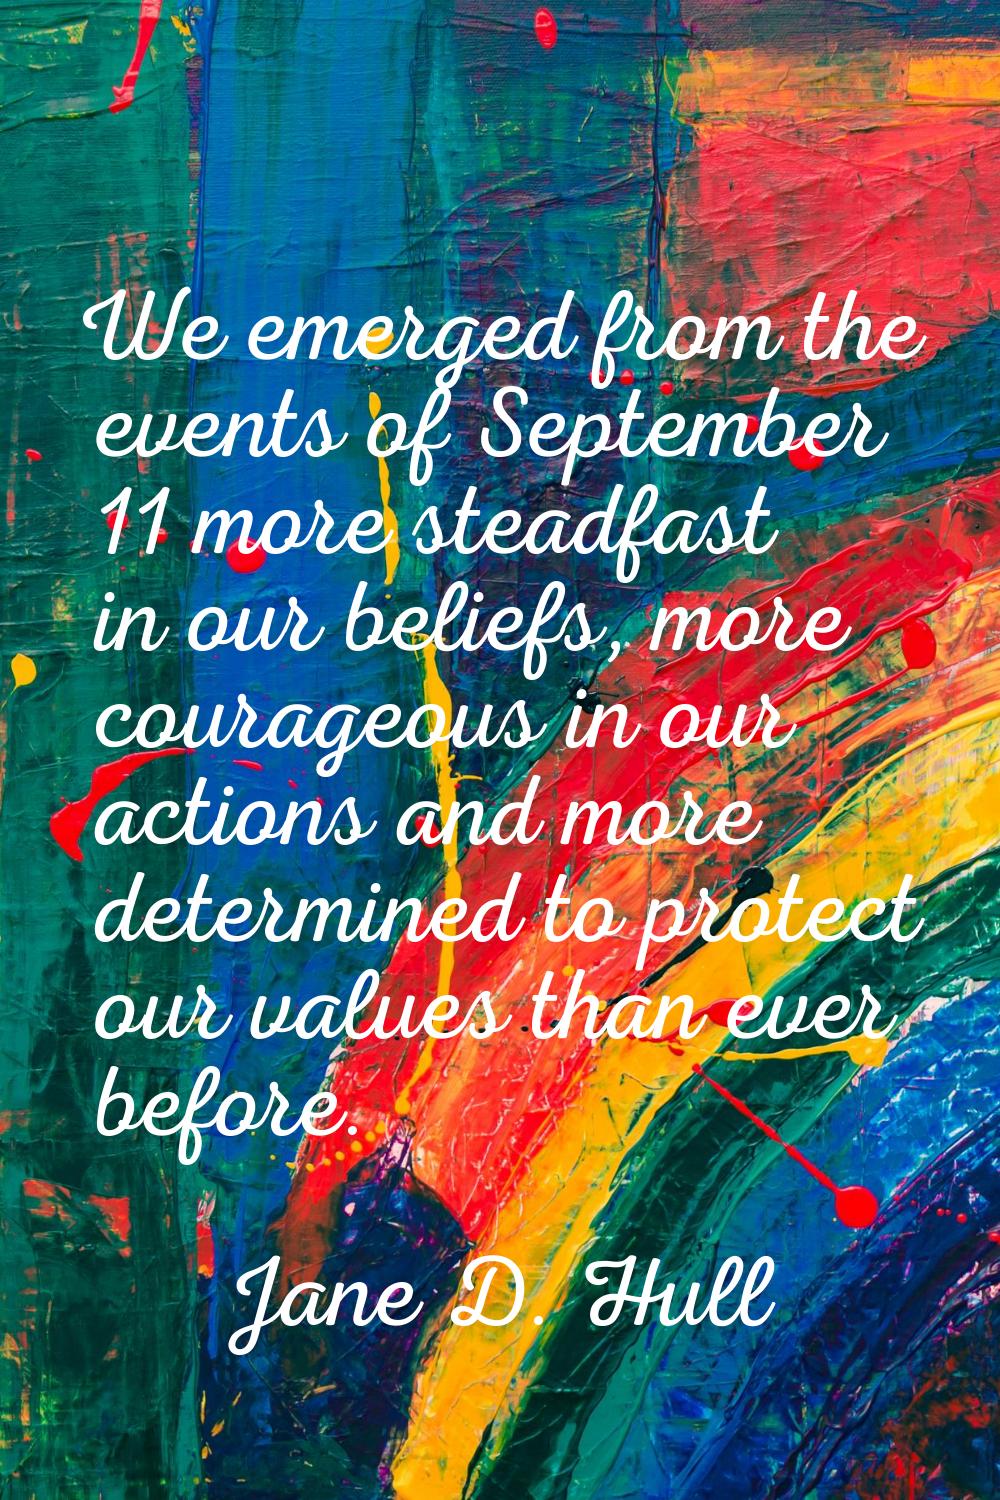 We emerged from the events of September 11 more steadfast in our beliefs, more courageous in our ac